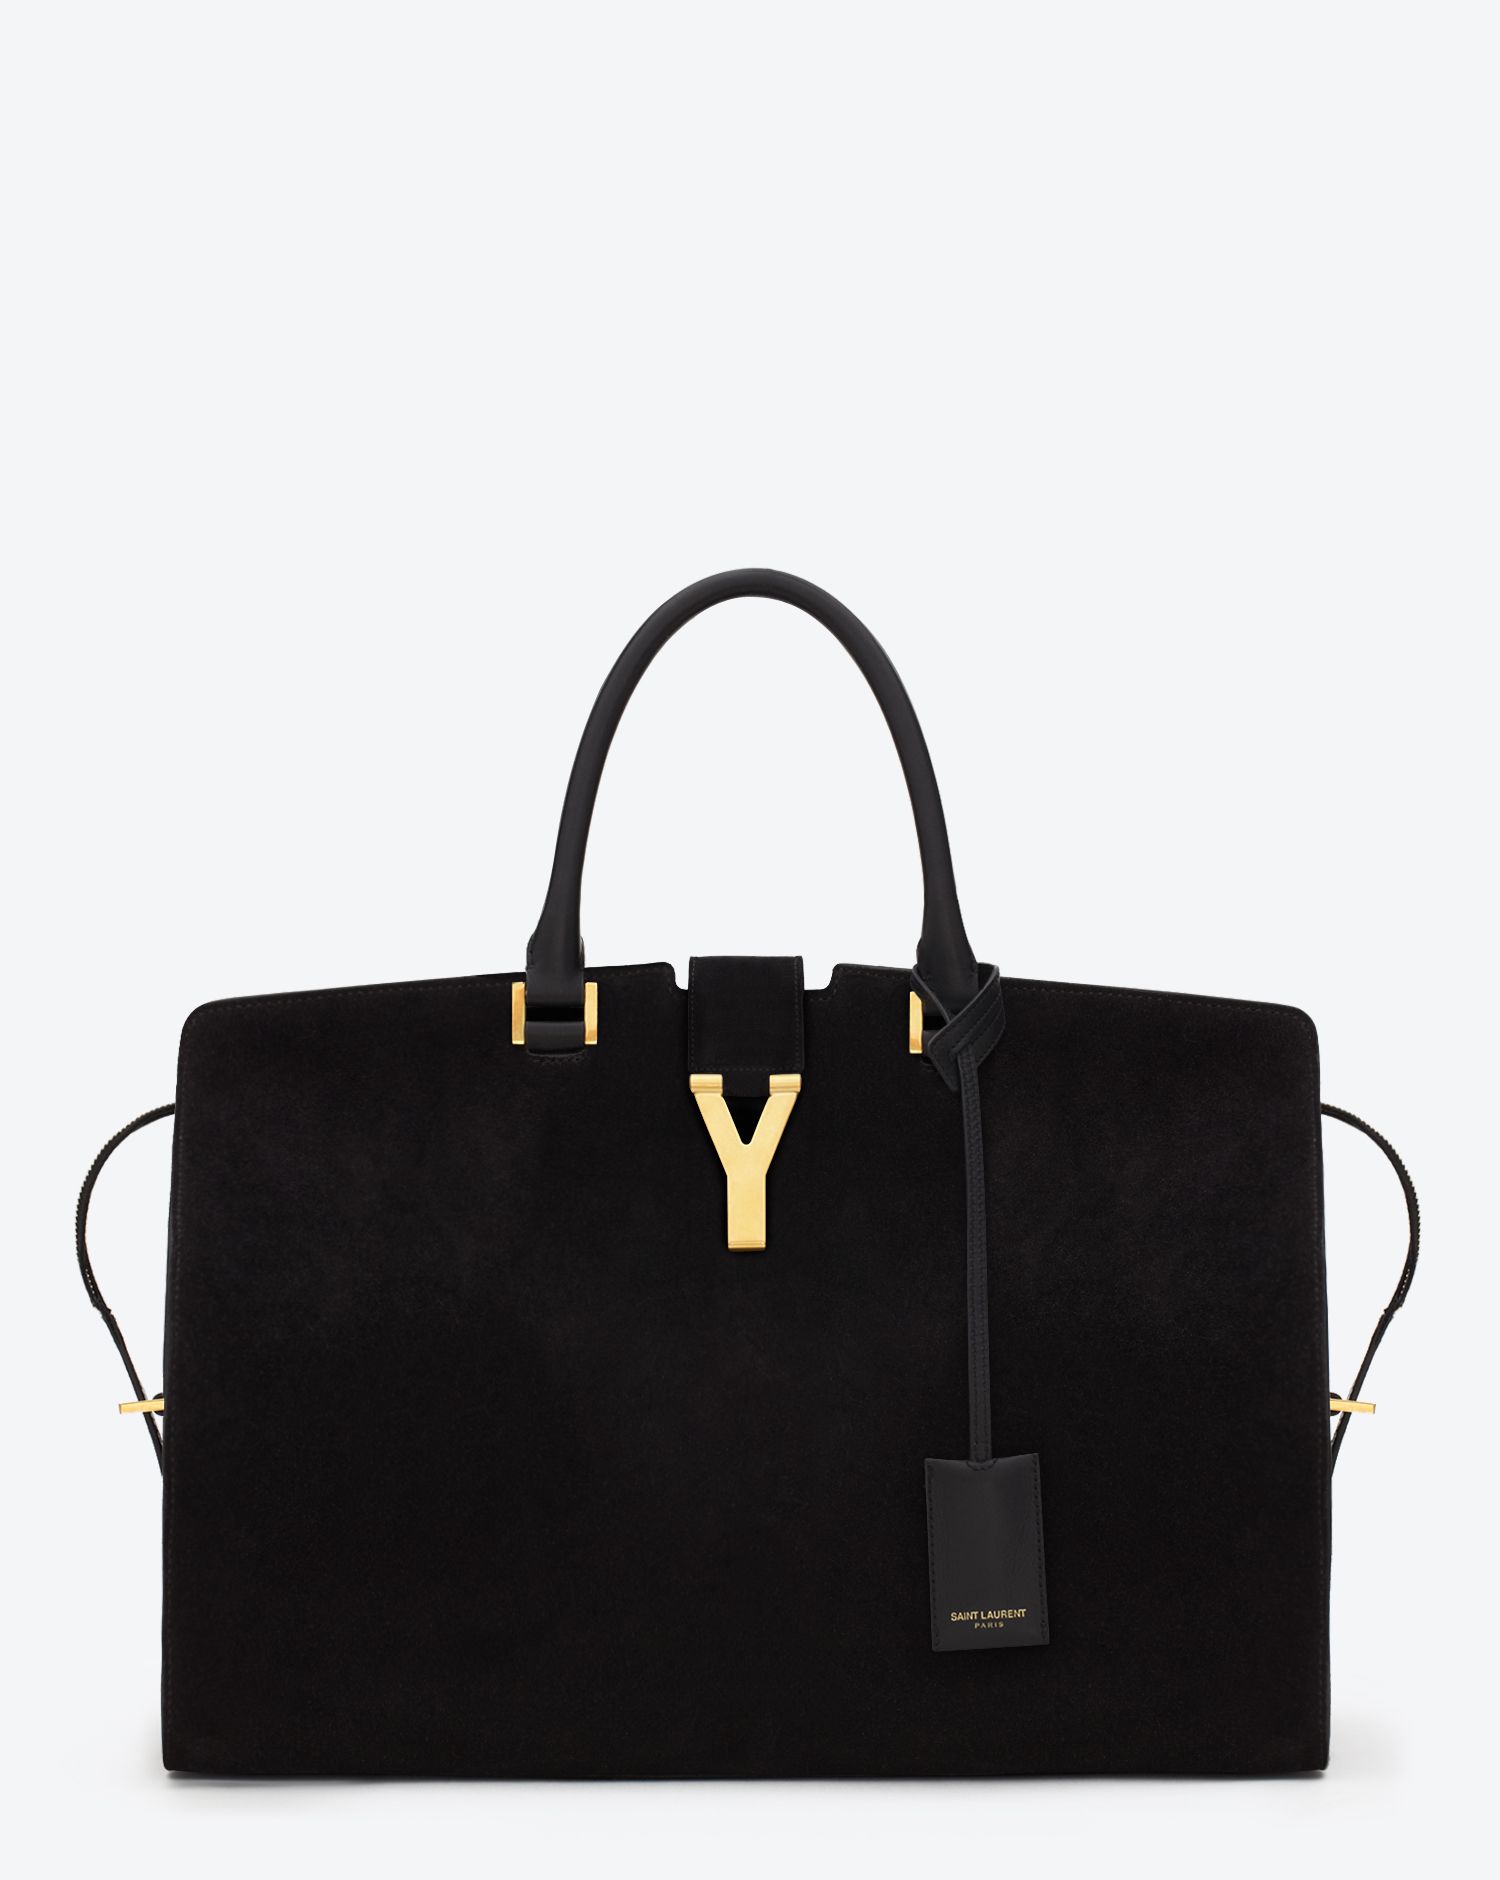 Saint Laurent Monogramme Cabas Bag Reference Guide - Spotted Fashion